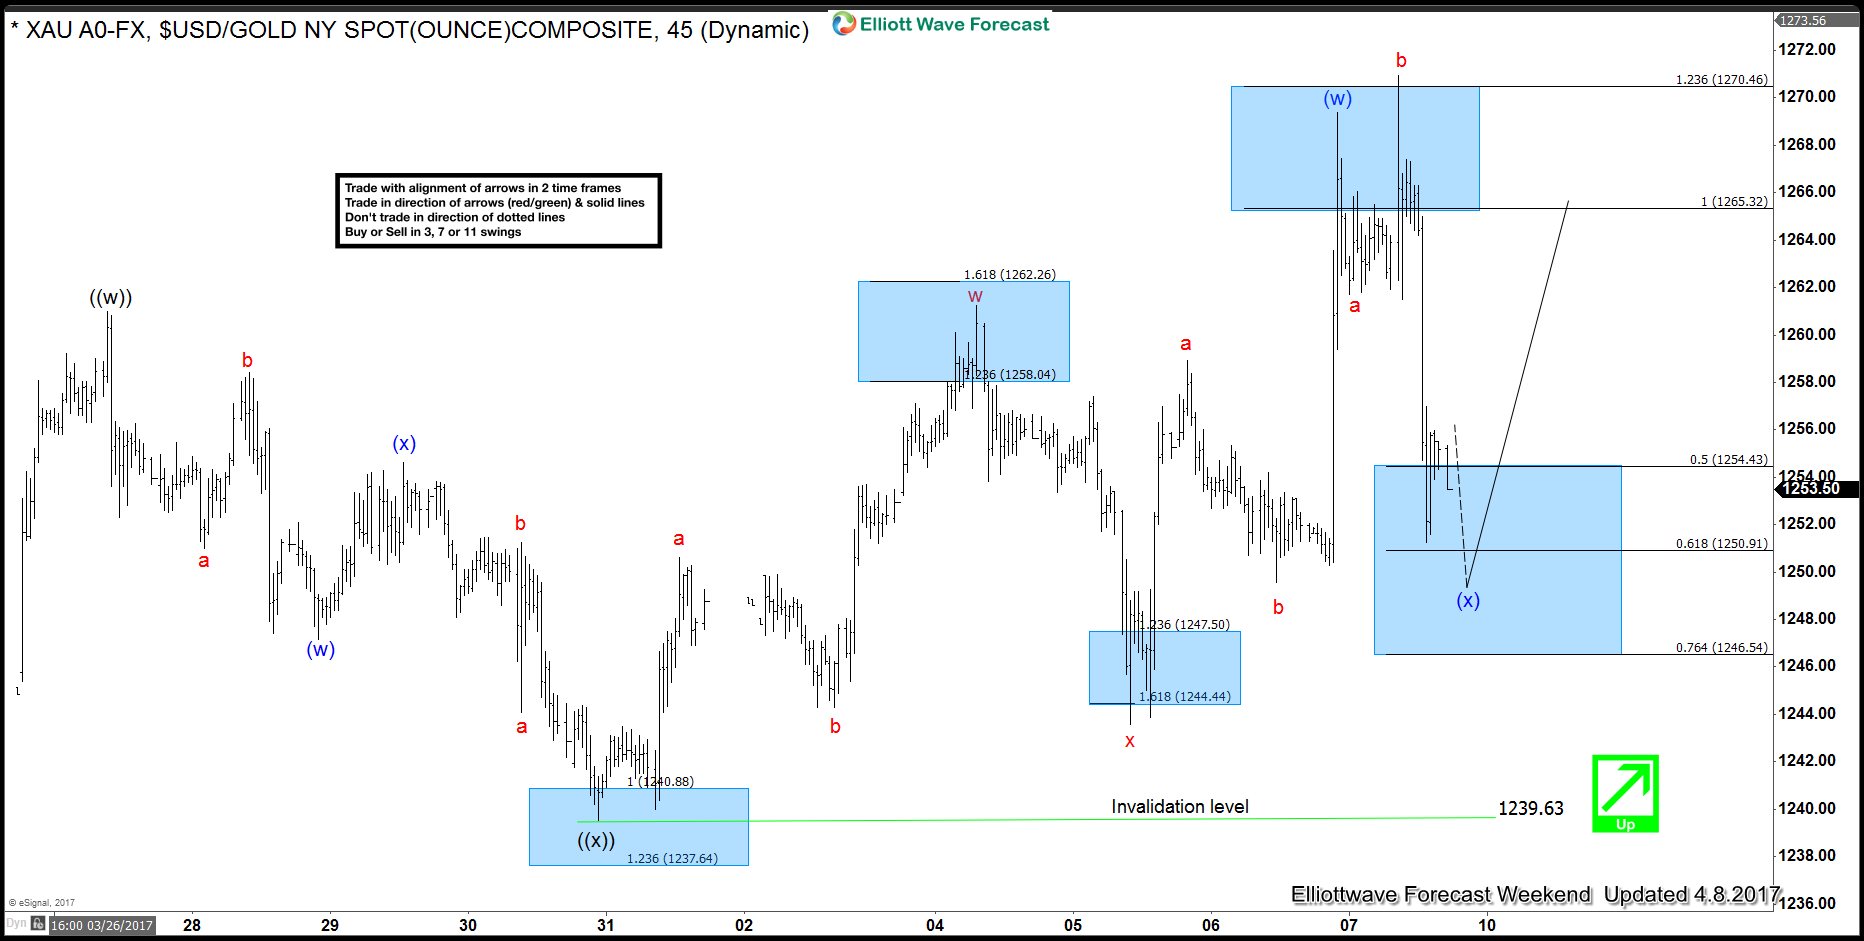 Gold rallied after Elliott Wave Flat Correction